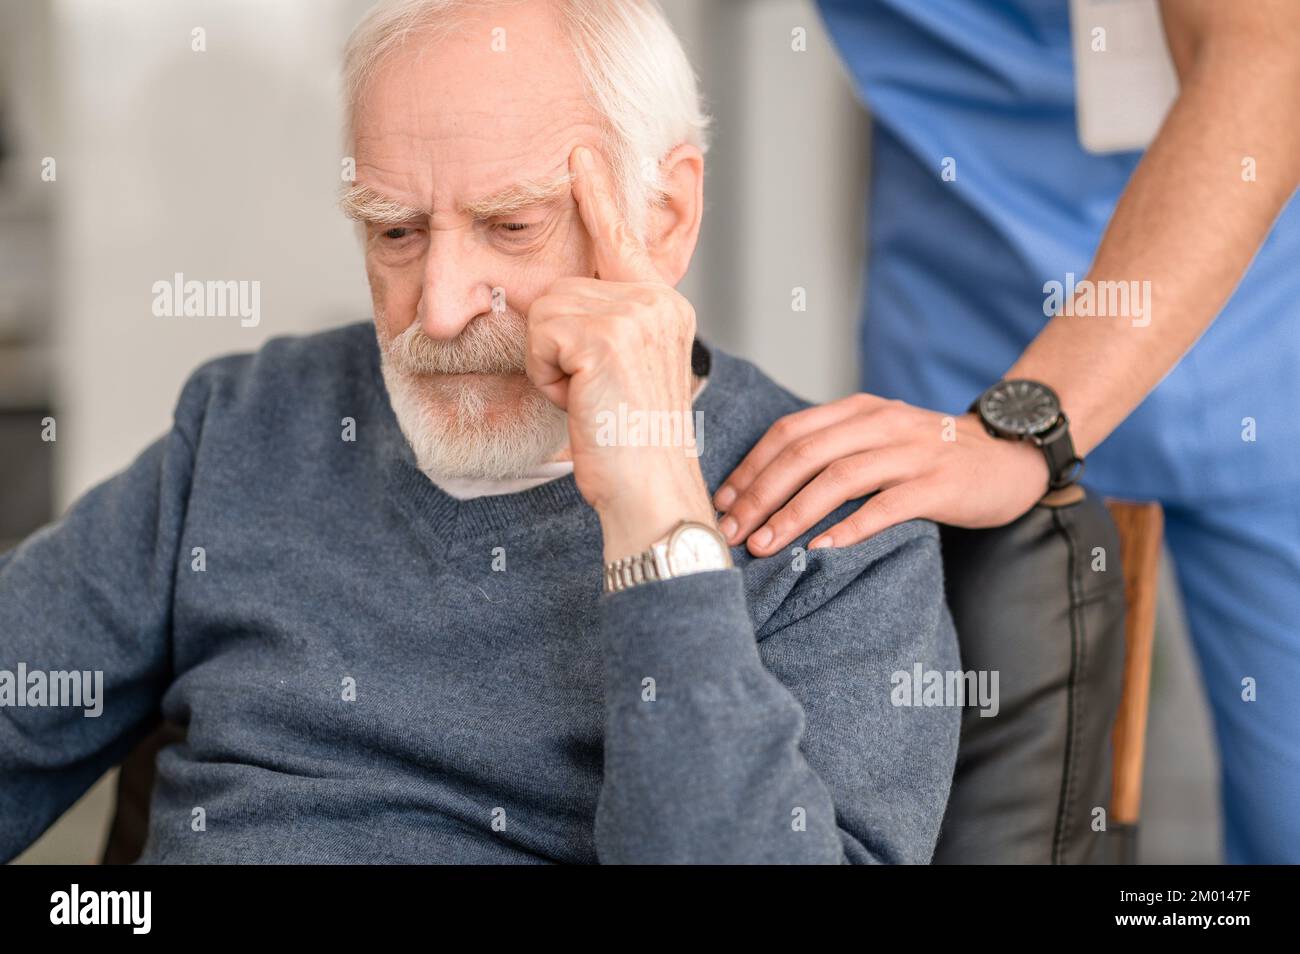 Sad old man sitting in the armchair while his caretaker patting him on the shoulder. Stock Photo